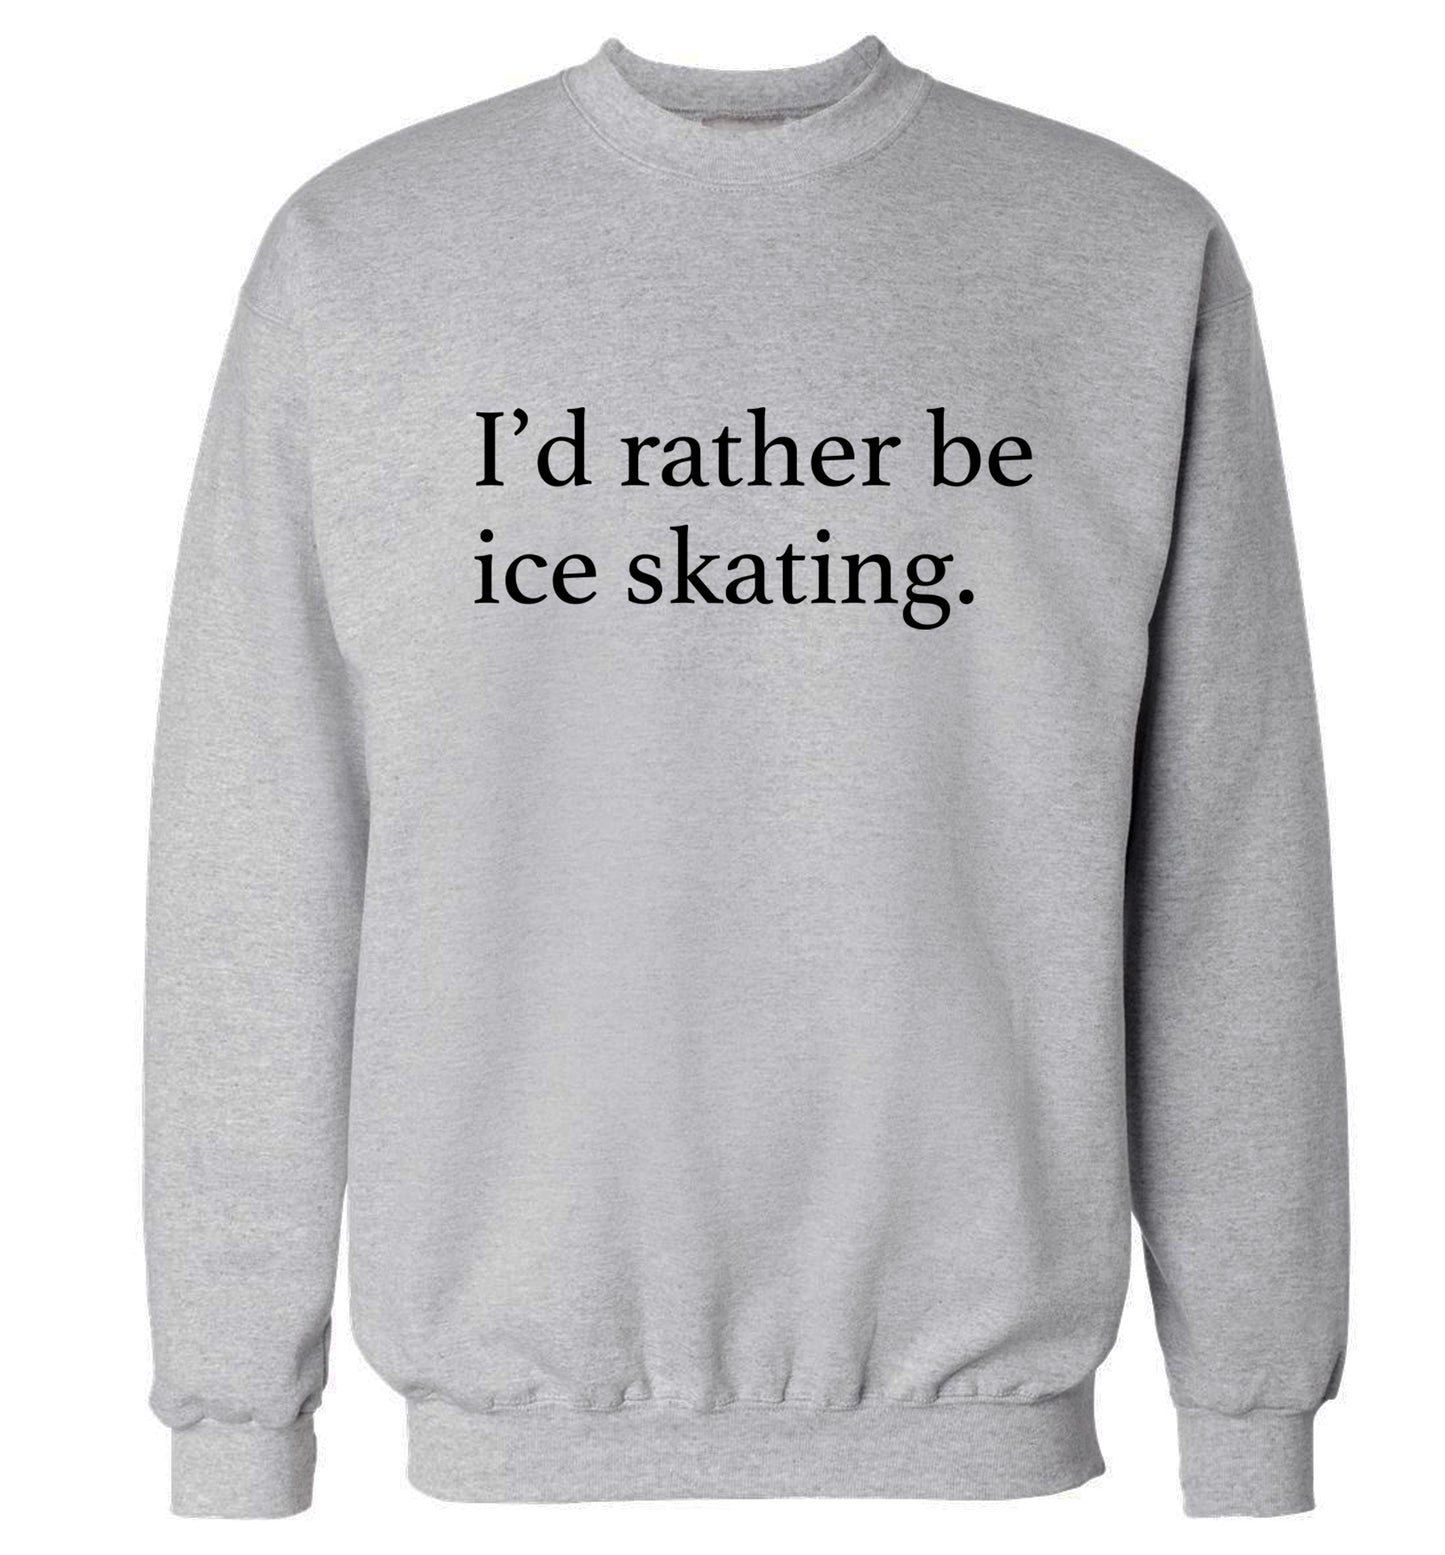 I'd rather be ice skating Adult's unisexgrey Sweater 2XL